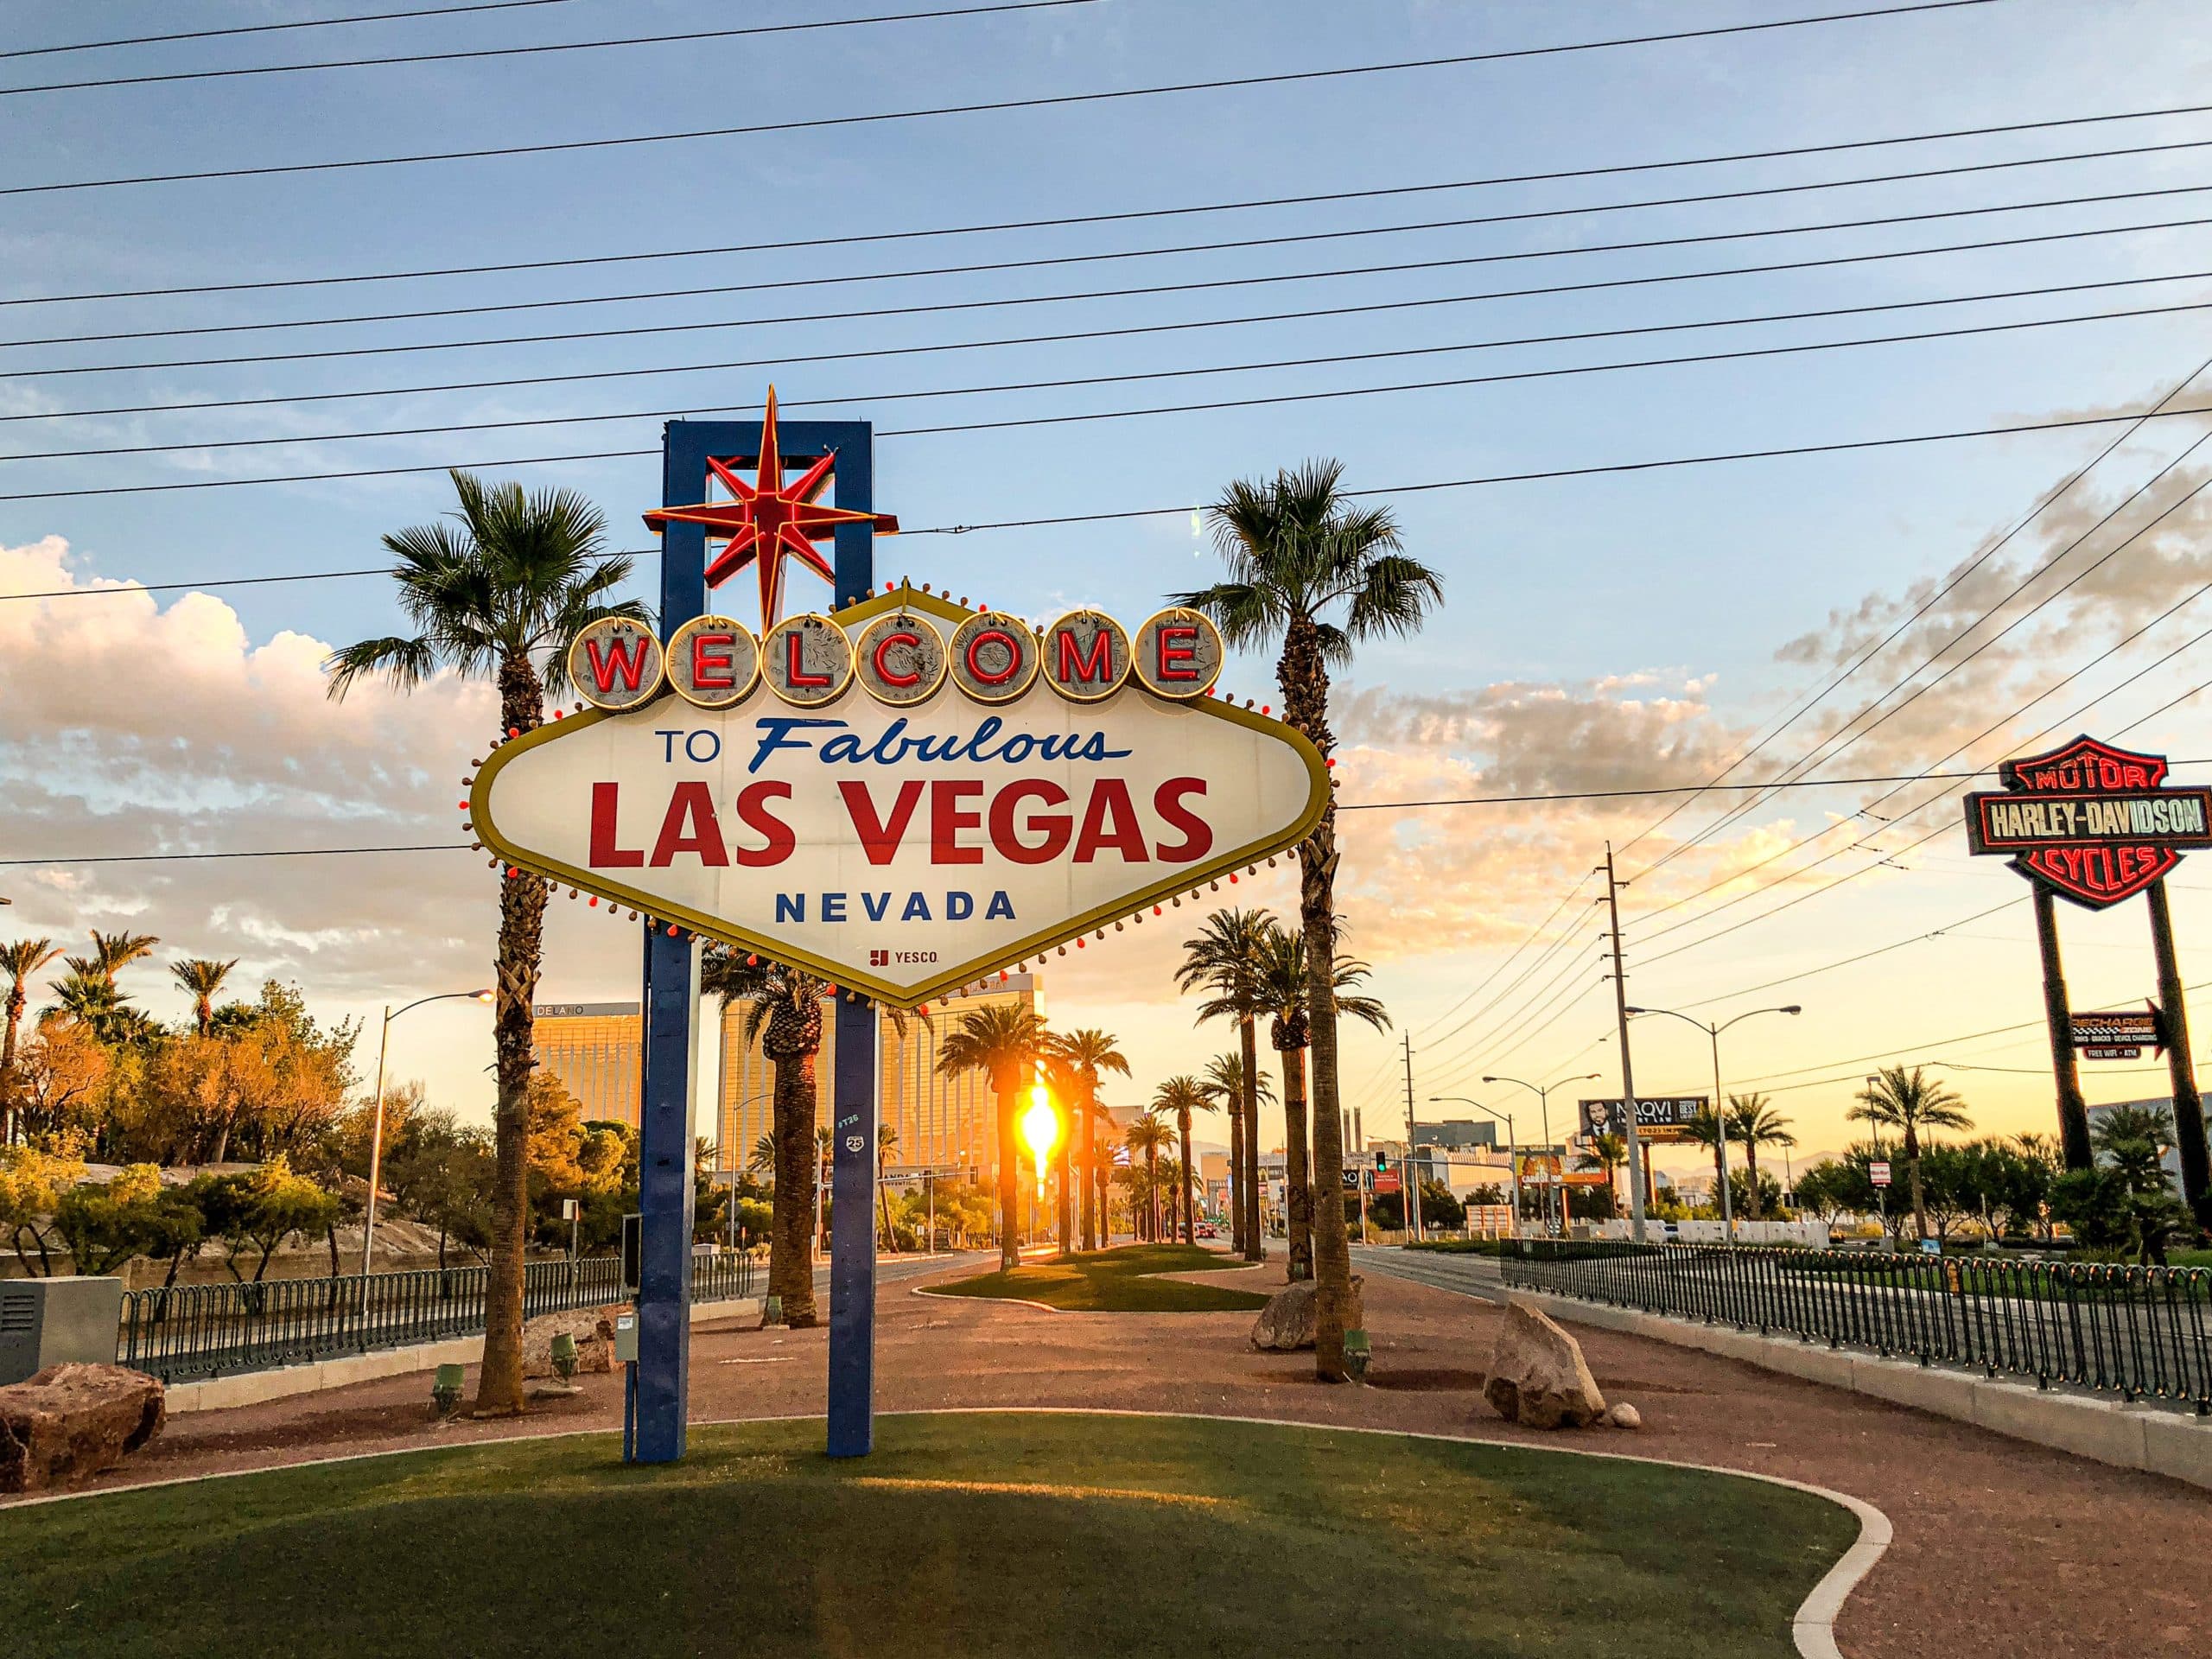 100 Fun and Exciting Things to Do in Las Vegas